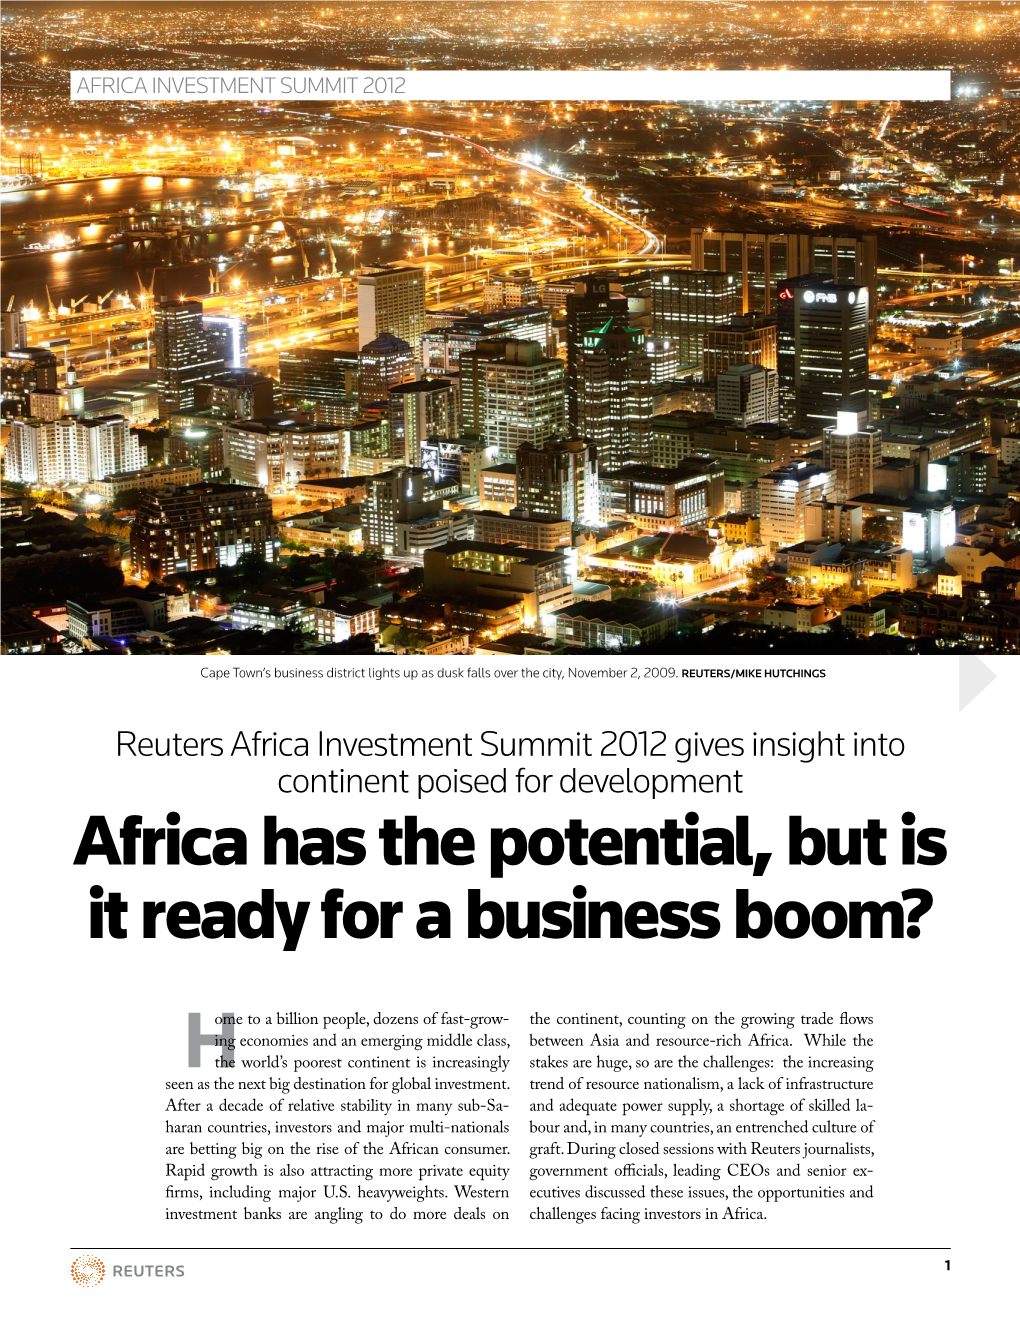 Africa Has the Potential, but Is It Ready for a Business Boom?